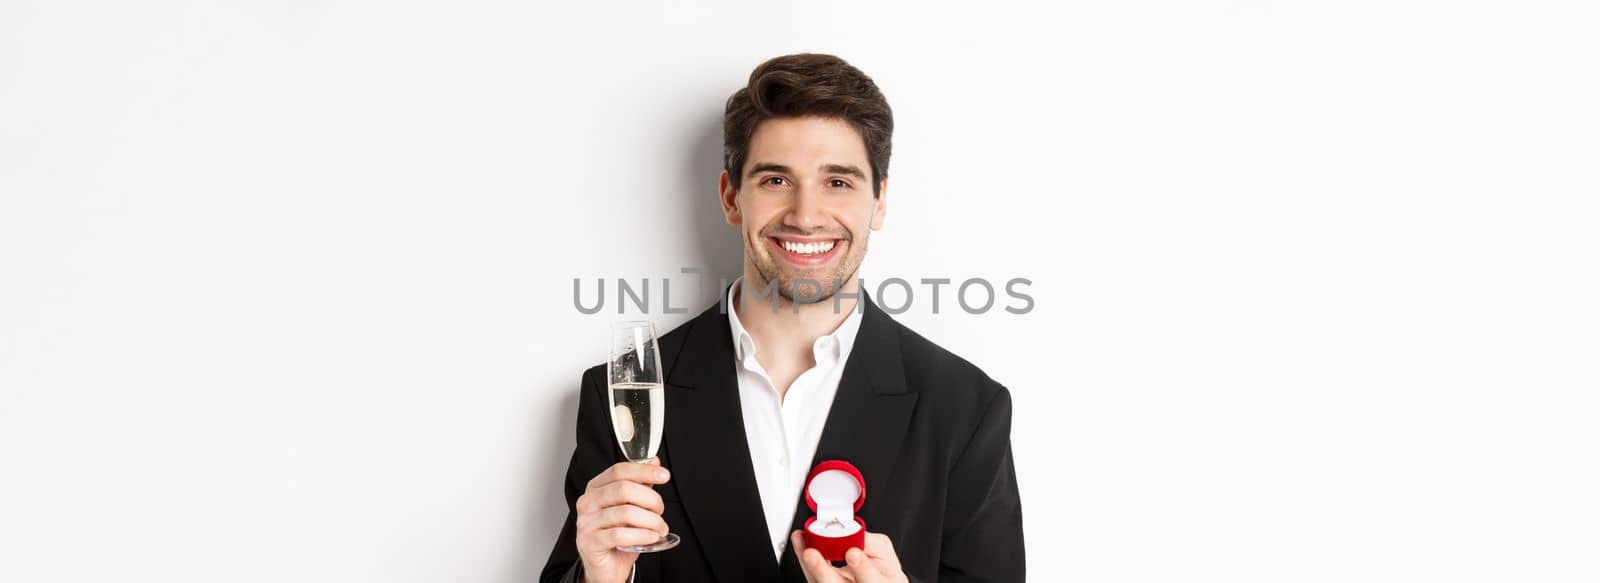 Close-up of handsome man in suit, making a proposal, giving engagement ring and raising glass of champagne, standing against white background.